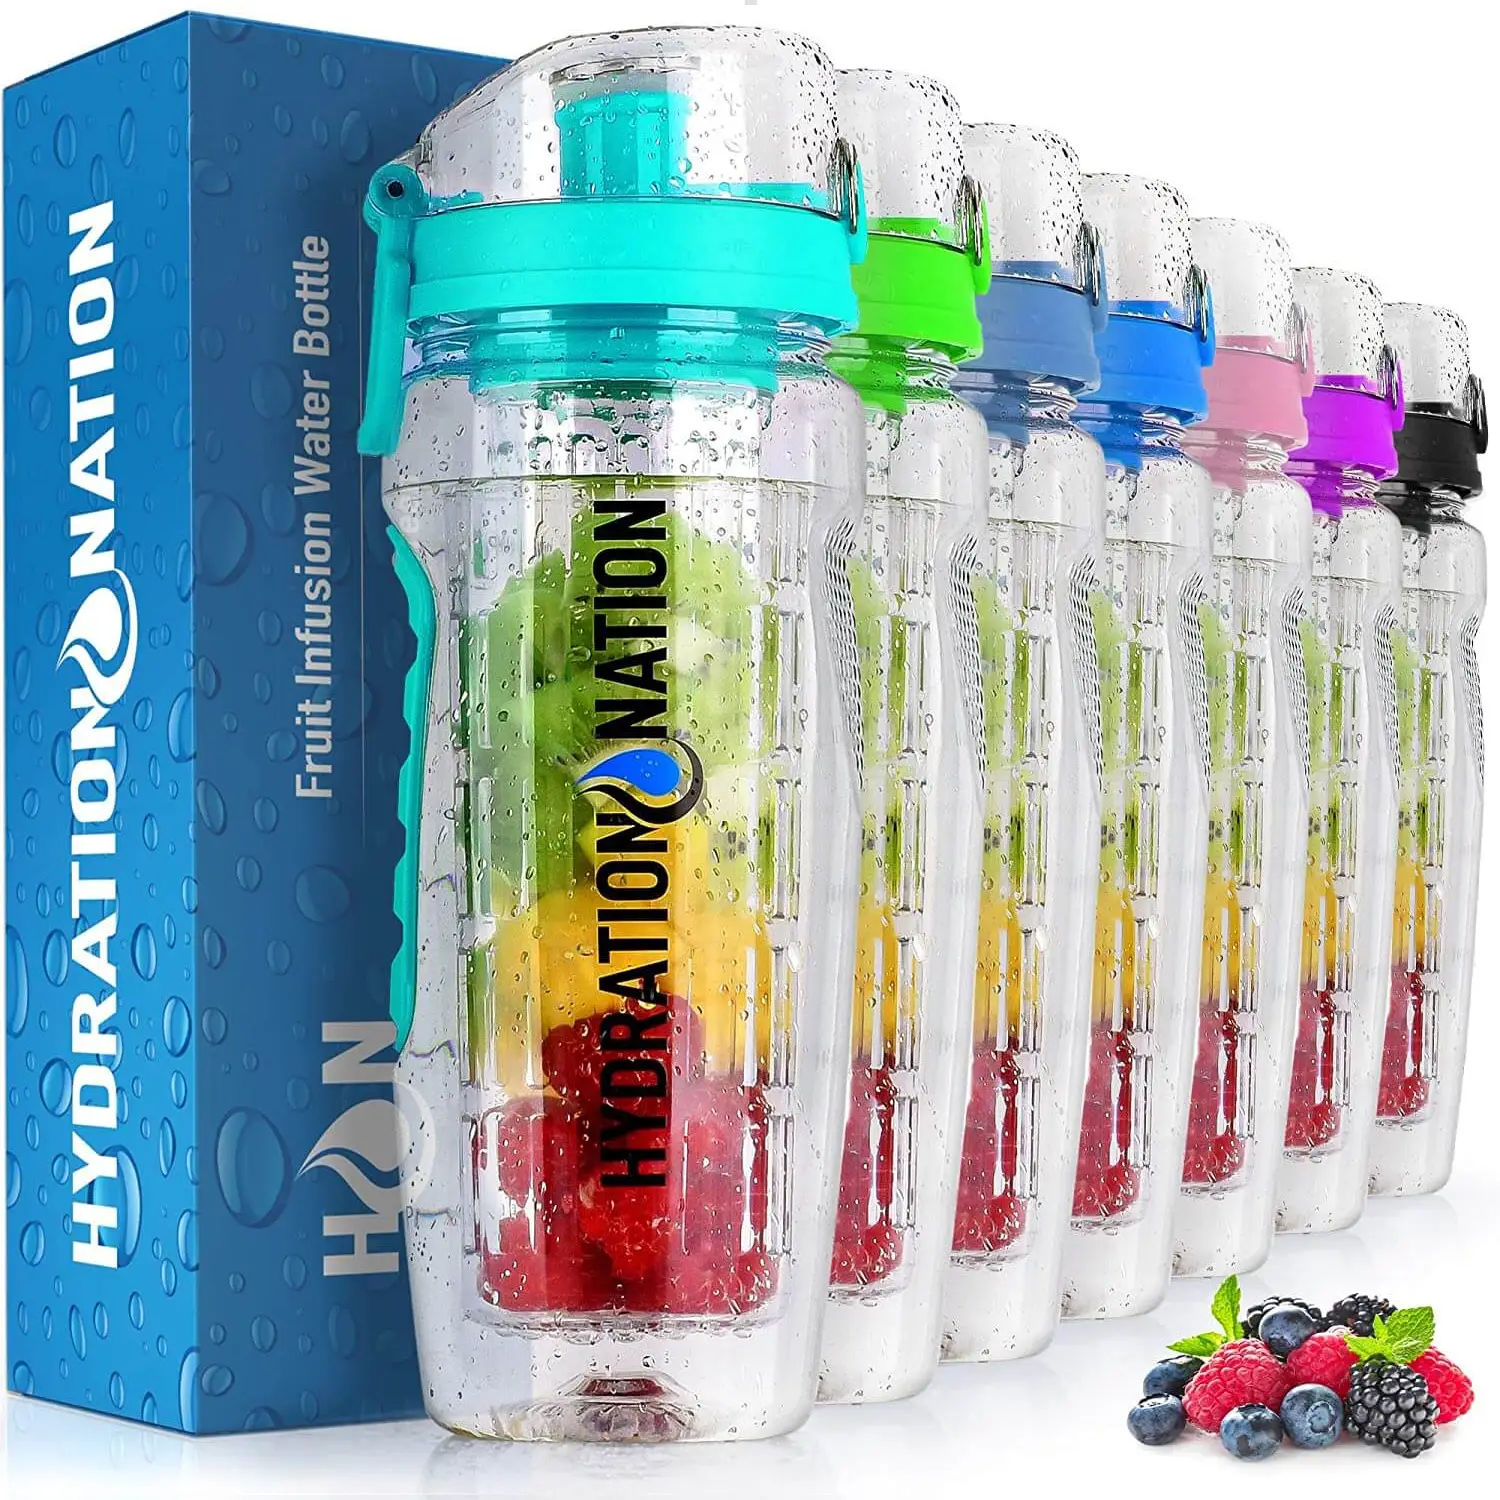 Hydration Nation Portable Water Bottle With Fruit Infuser